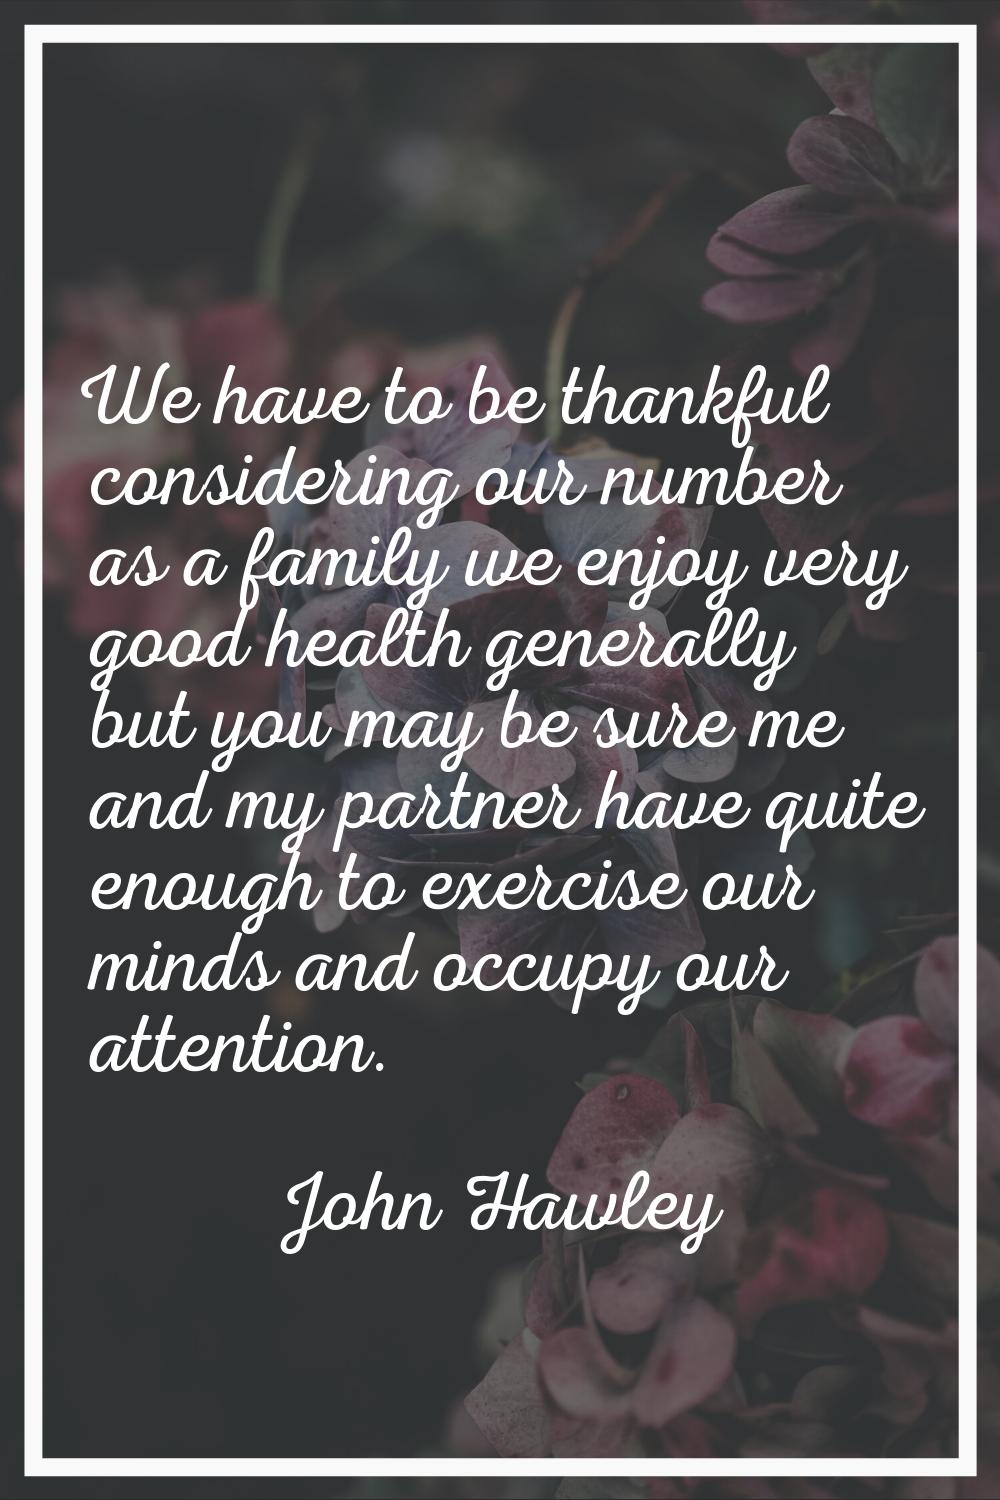 We have to be thankful considering our number as a family we enjoy very good health generally but y